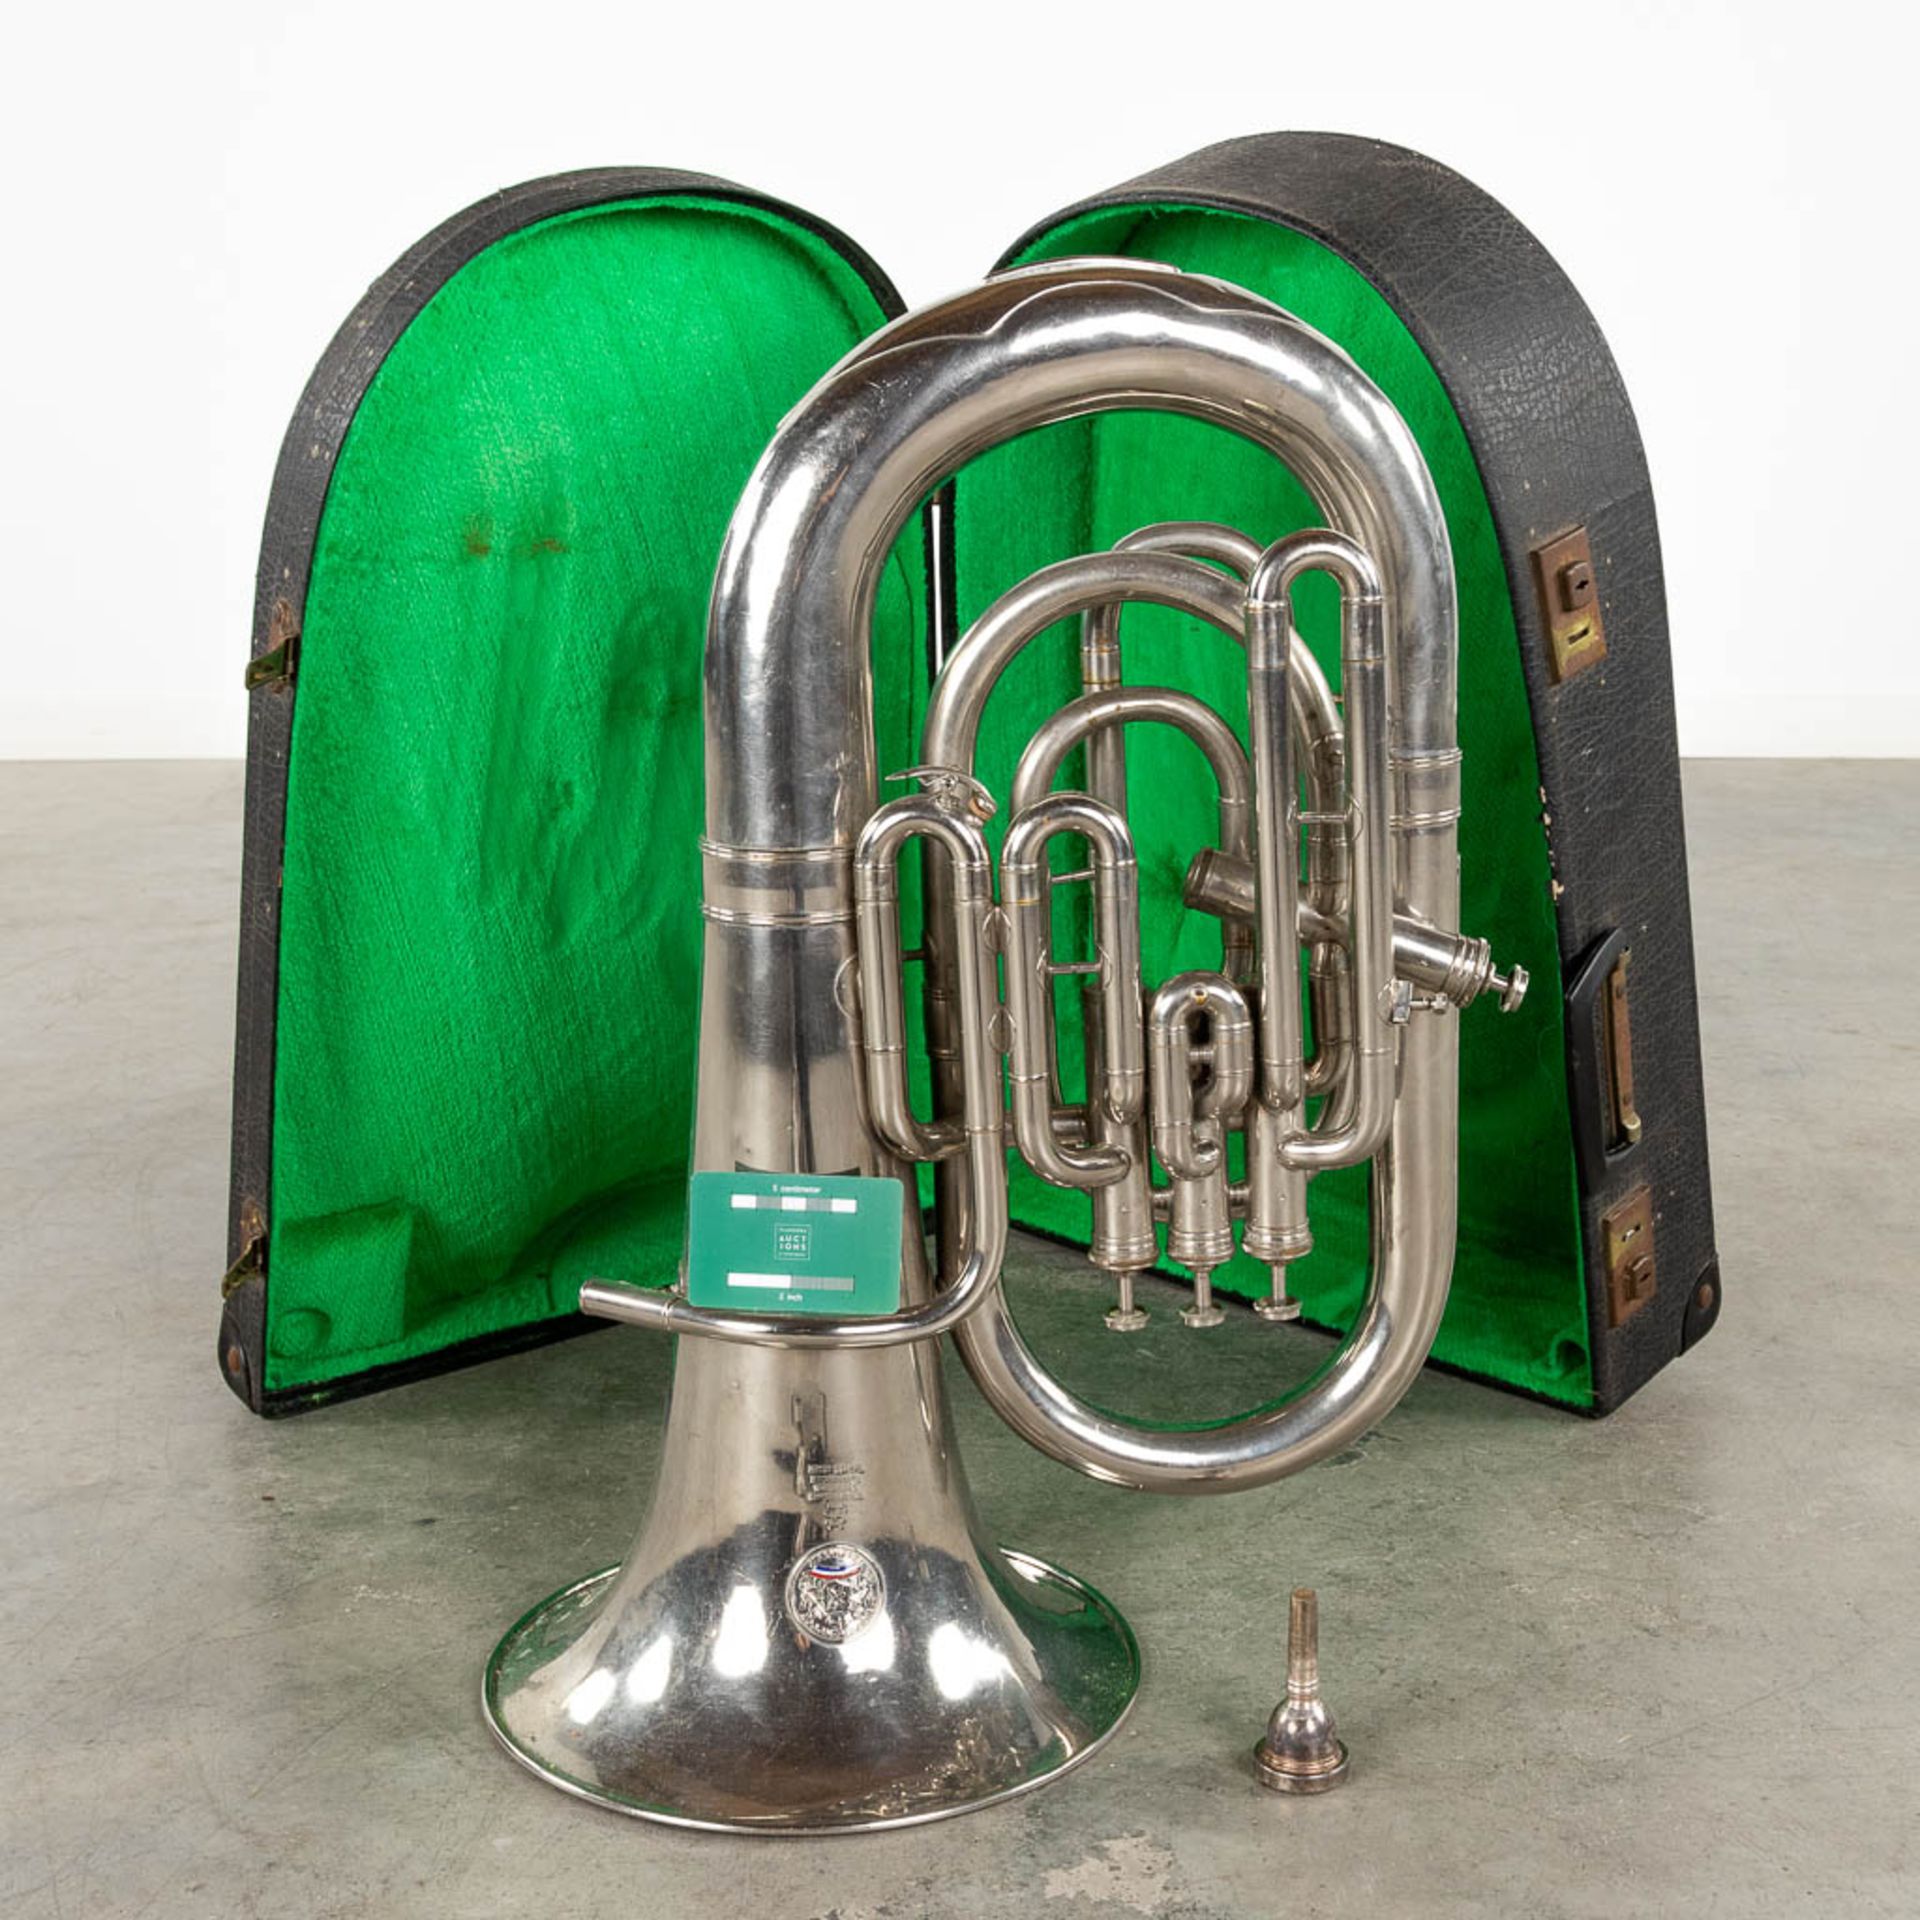 A Brass Tuba, Musical Instrument. The Netherlands, 20th C. (D:47 x W:65 x H:33 cm) - Image 2 of 12